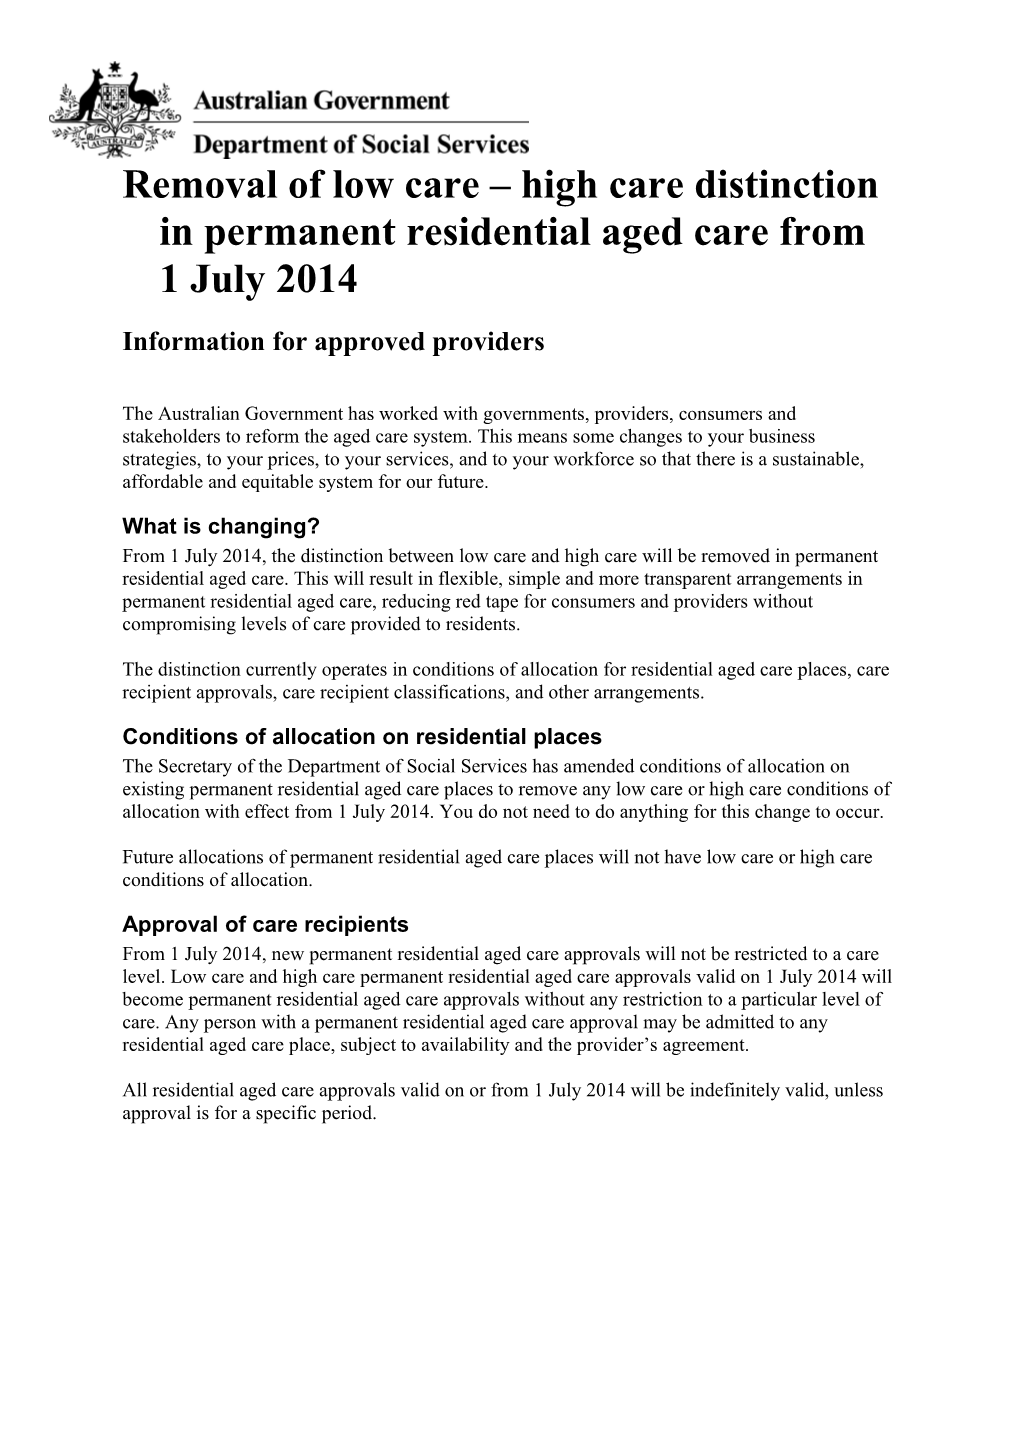 Removal of Low Care High Care Distinction in Permanent Residential Aged Care from 1 July 2014